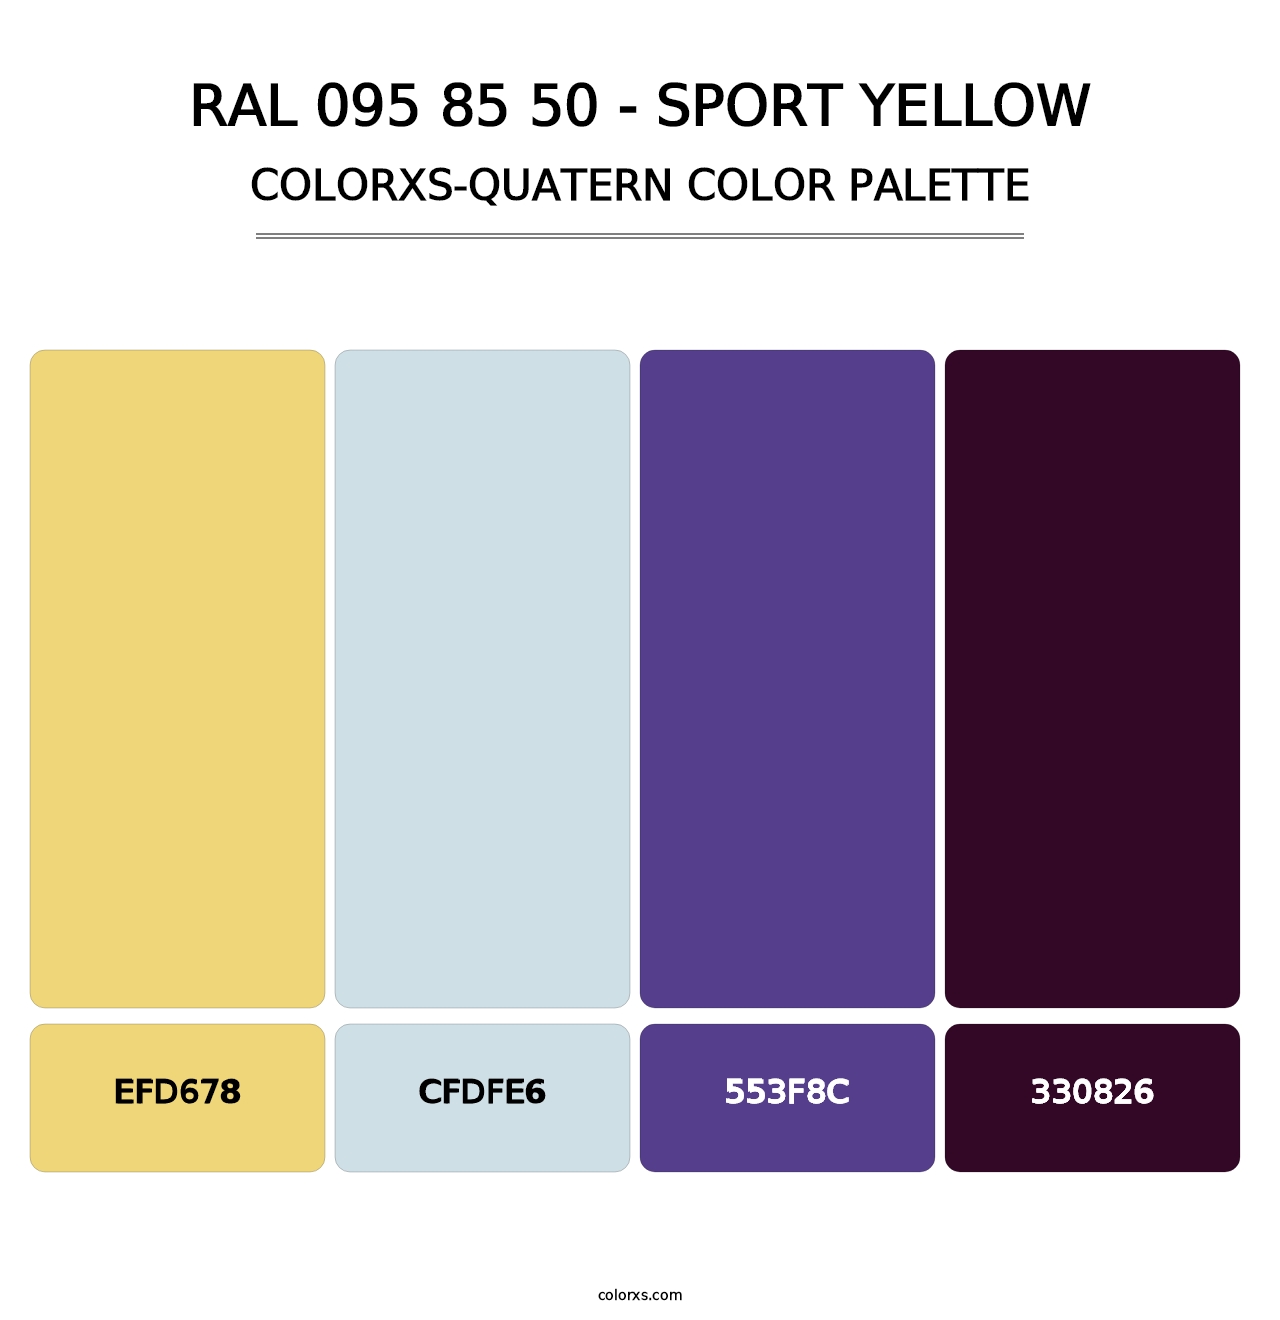 RAL 095 85 50 - Sport Yellow - Colorxs Quatern Palette